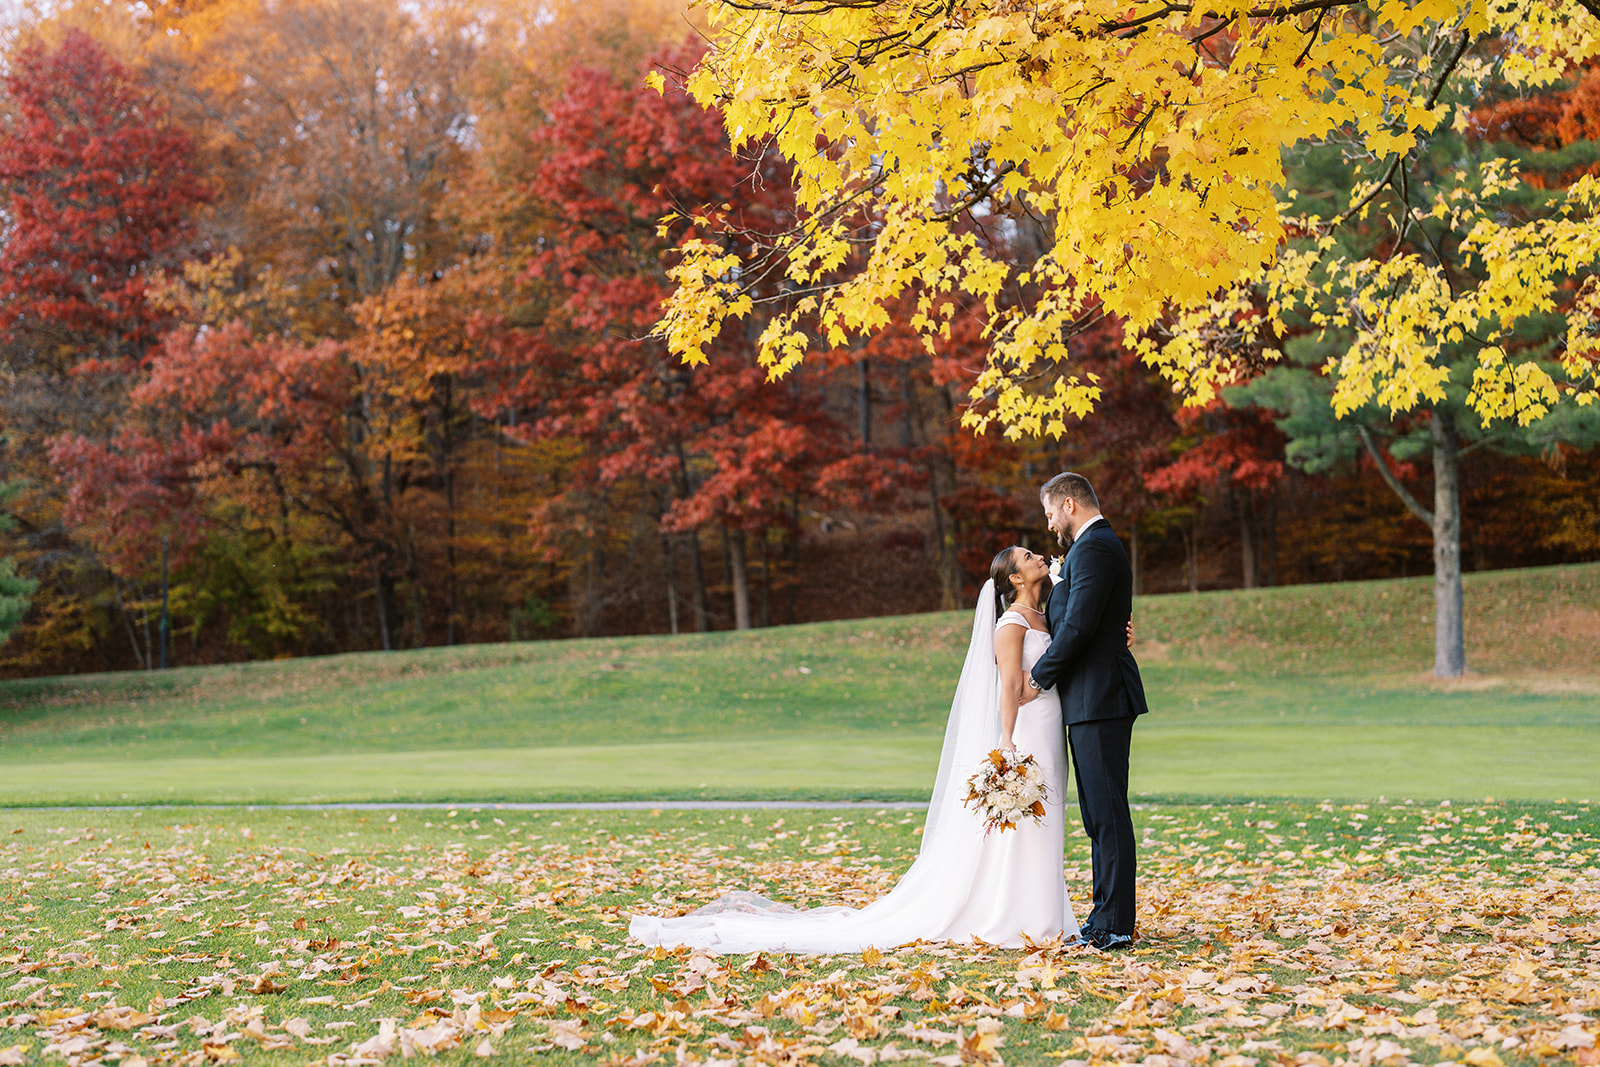 A couple, just married, embraces under vibrant autumn leaves.